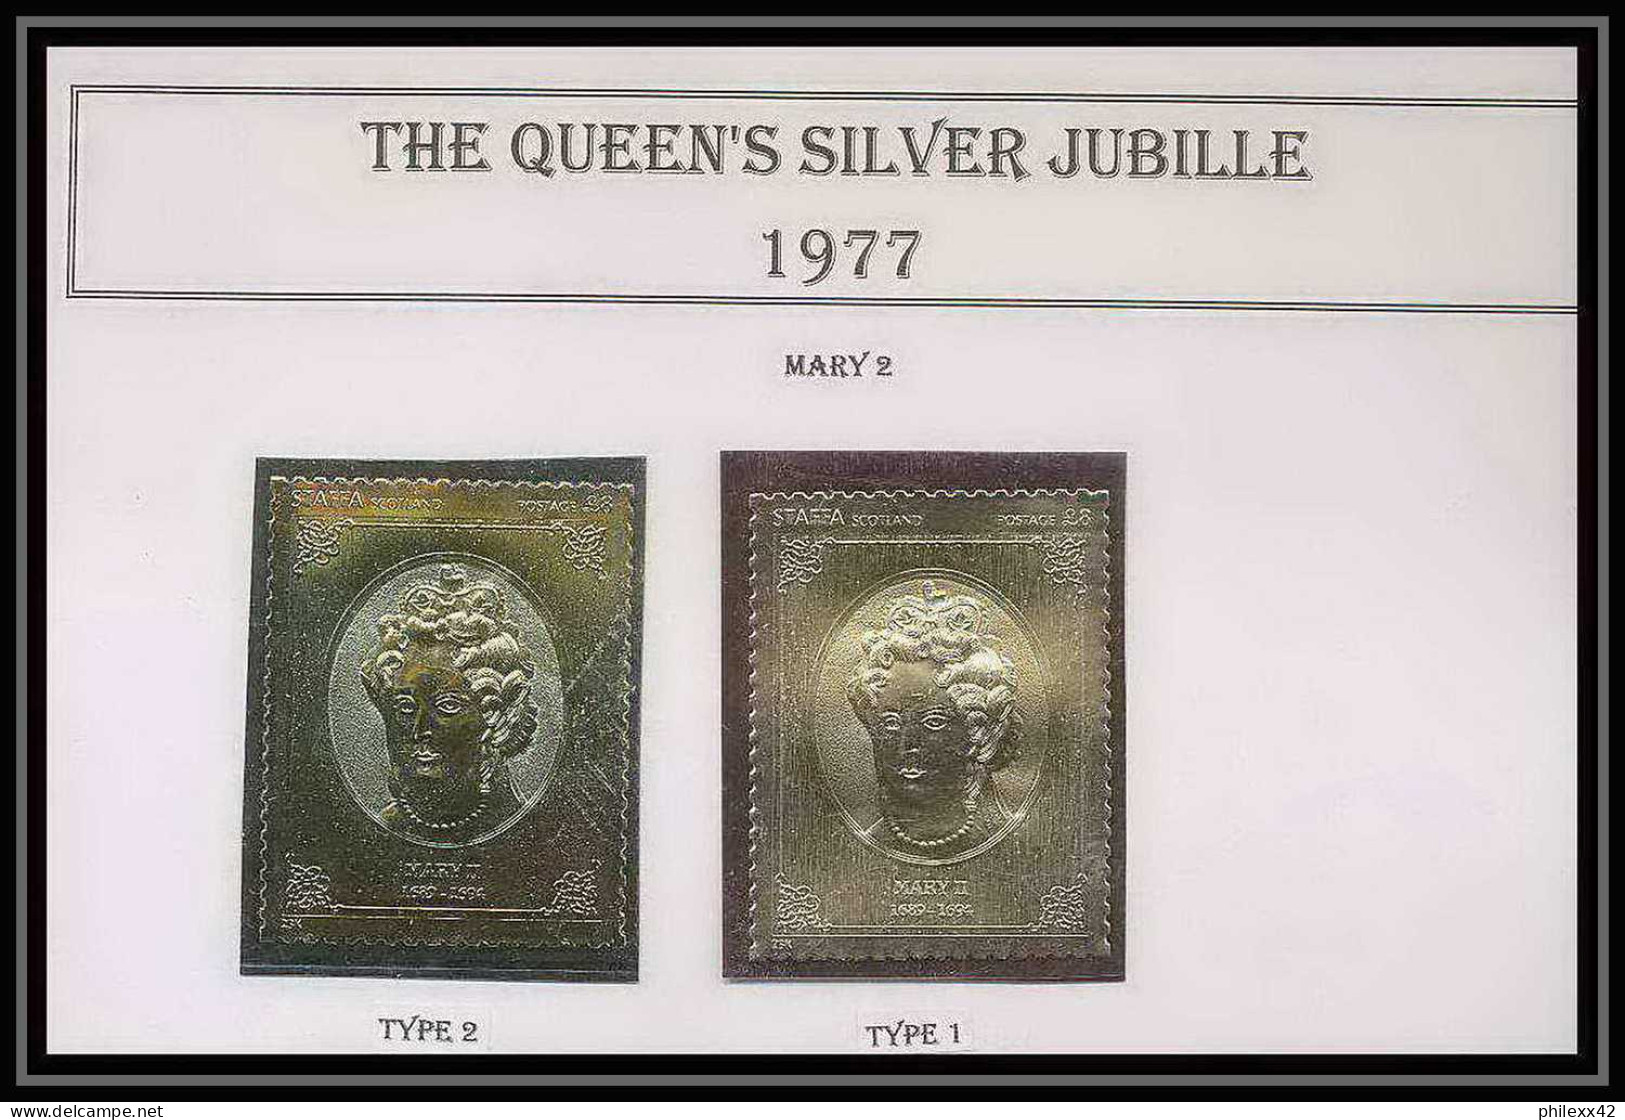 451 Staffa Scotland The Queen's Silver Jubilee 1977 OR Gold Stamps Monarchy United Kingdom Mary 2 Type 1&2 Neuf** Mnh - Scozia